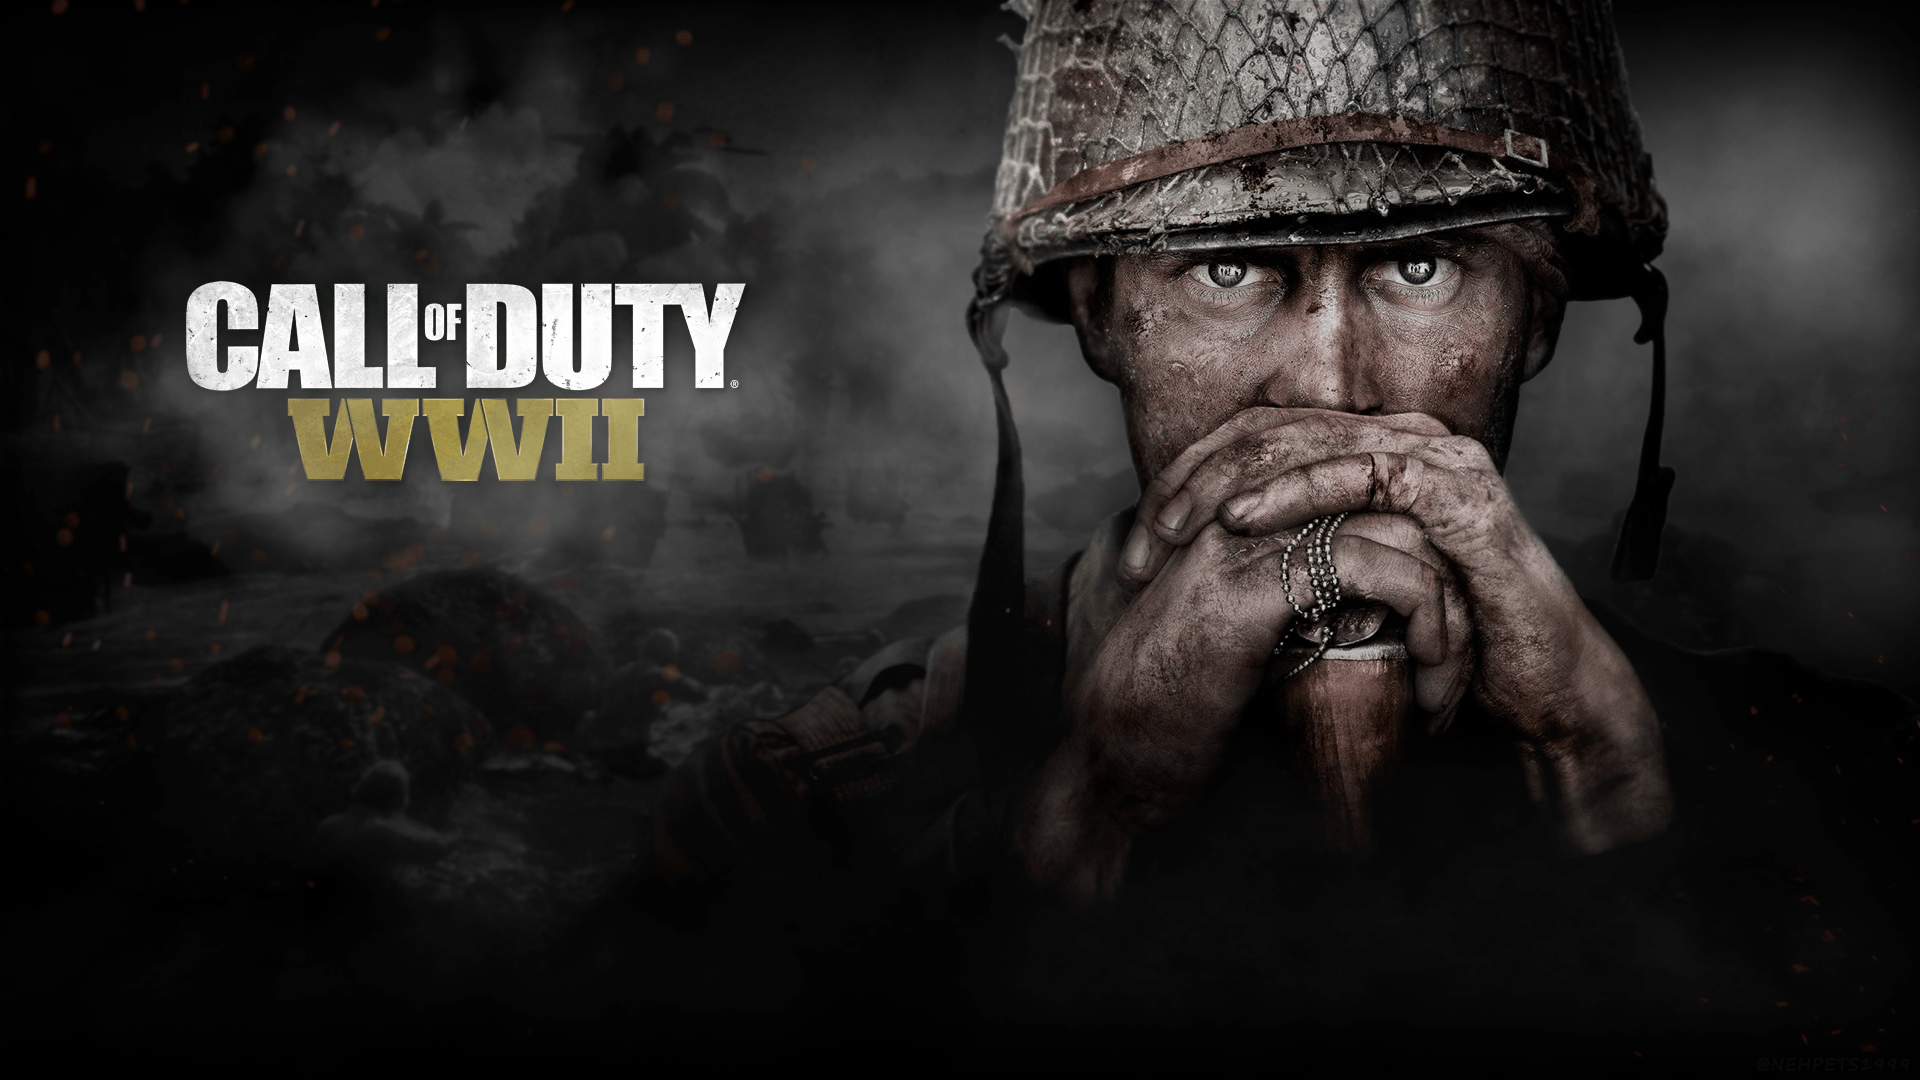 A little WWII wallpaper I made from the reveal image